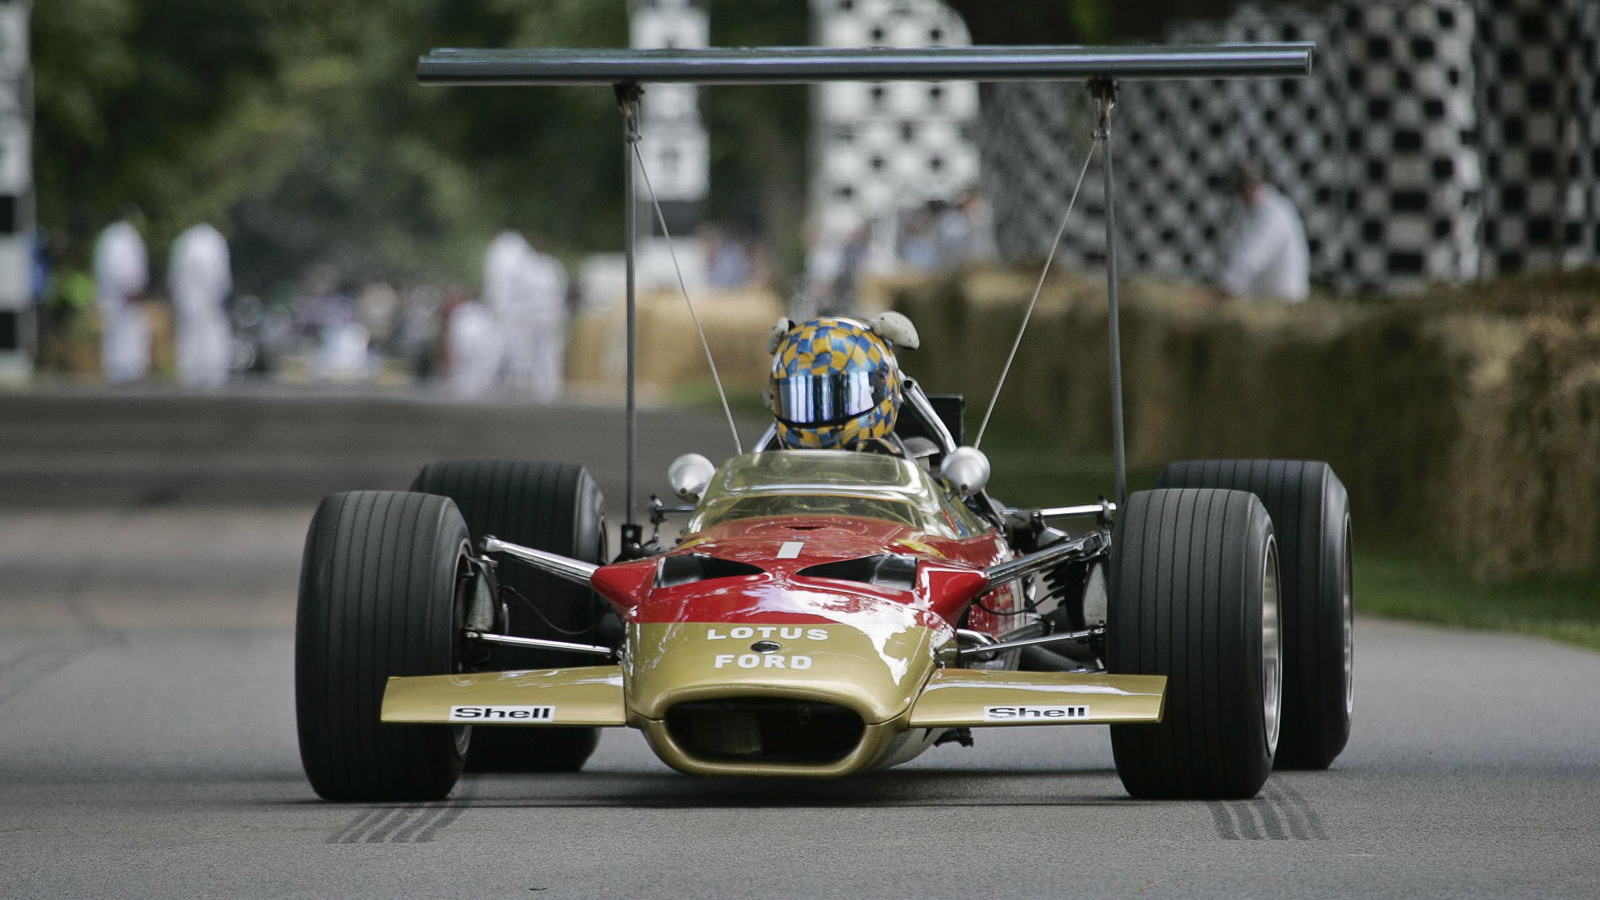 Lotus at previous Goodwood Festival of Speed events